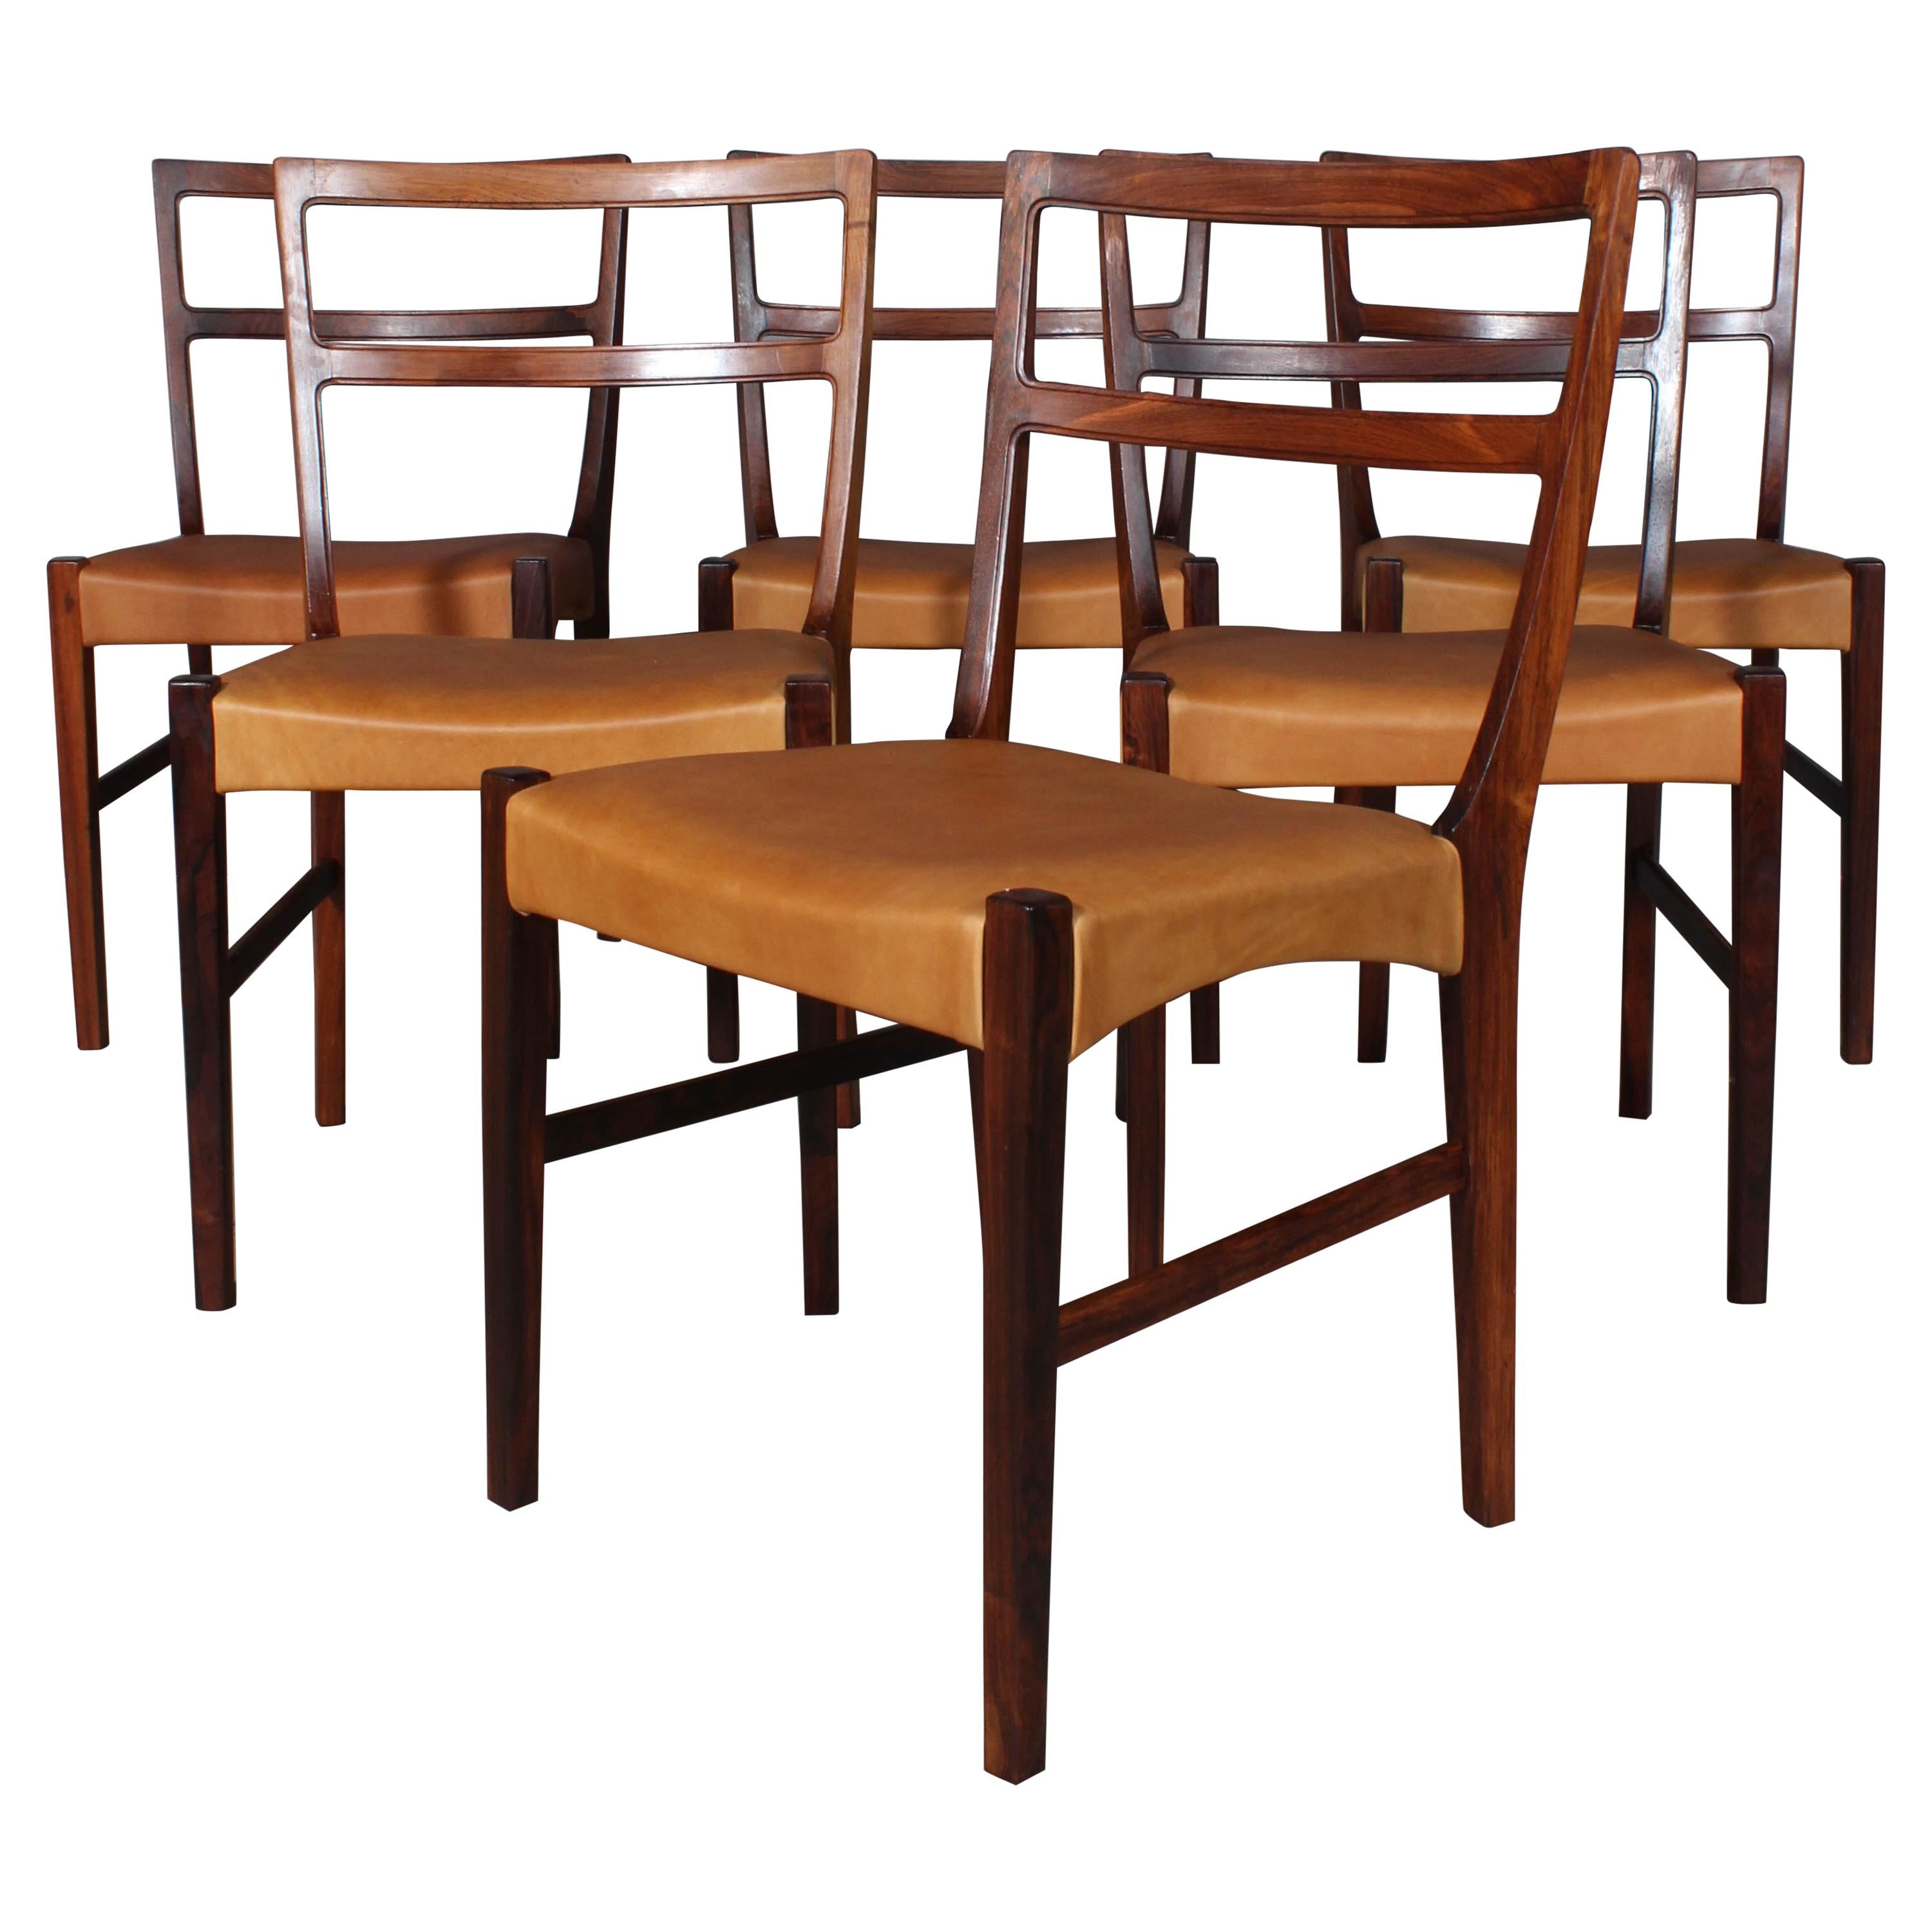 Johannes Andersen Six Dining Chairs, Rosewood and Leather Upholstery